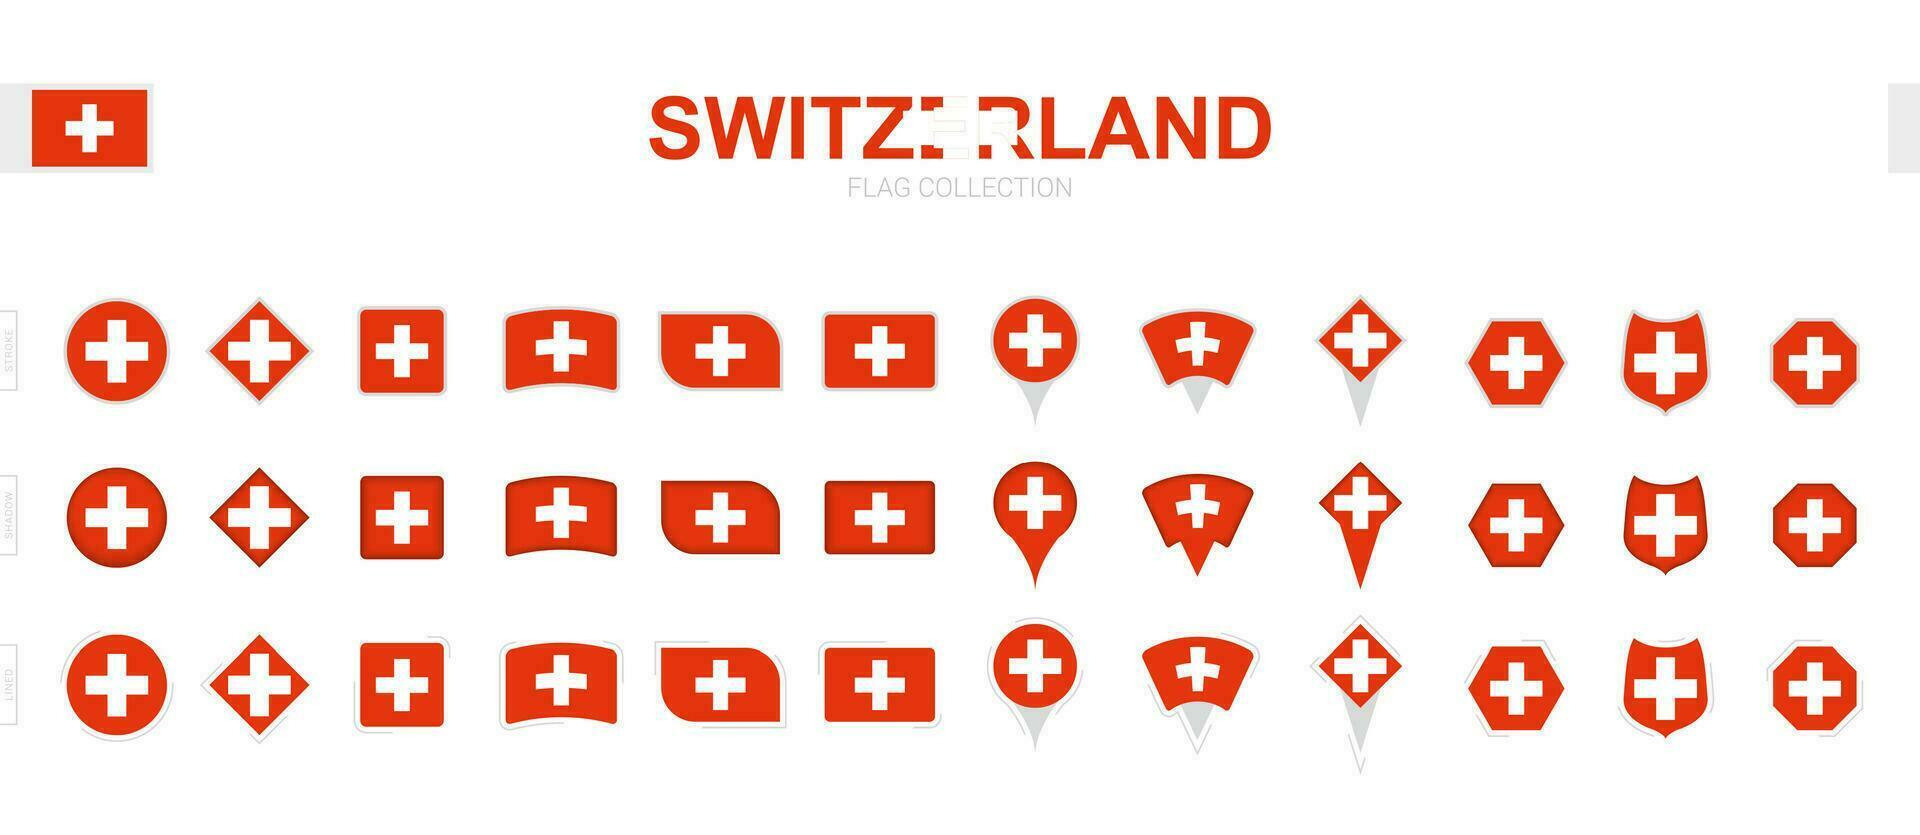 Large collection of Switzerland flags of various shapes and effects. vector